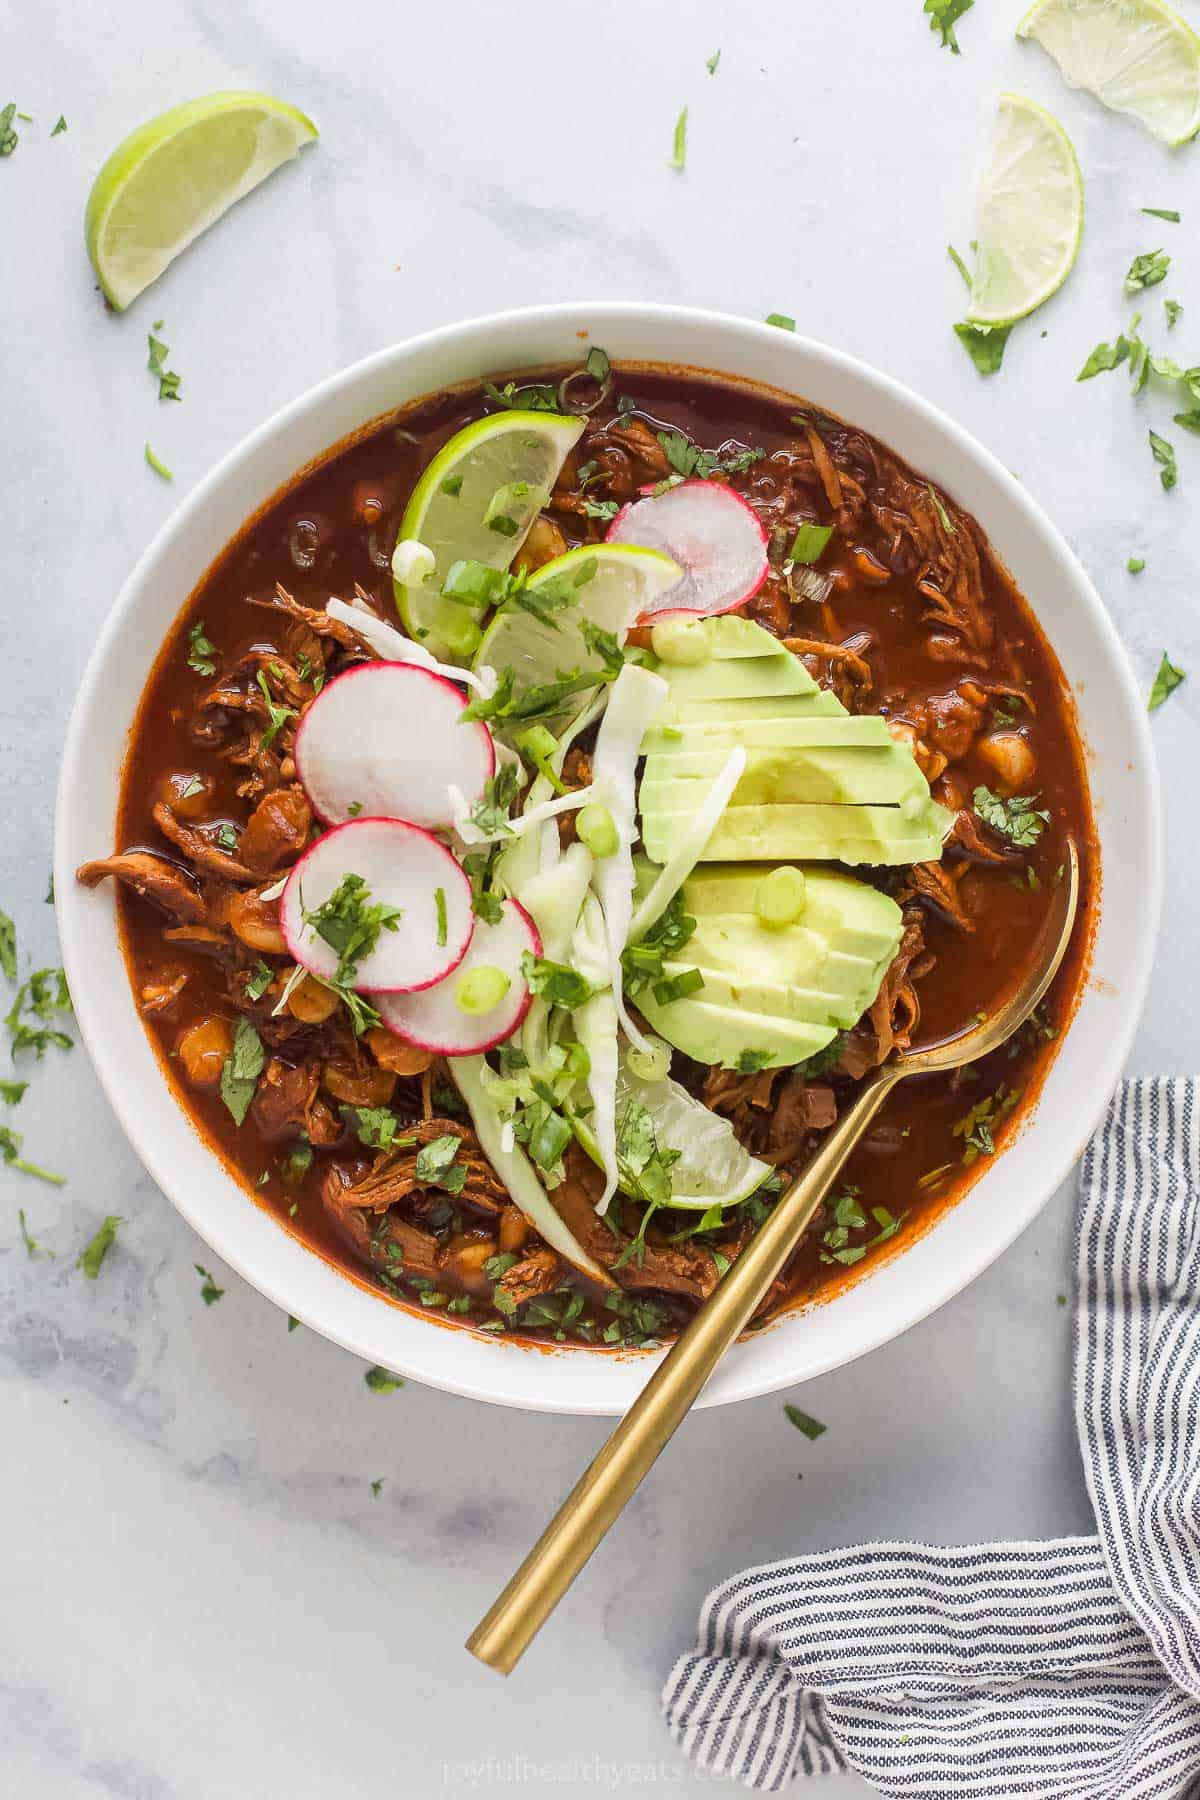 a bowl of red sauce based chicken stew garnished with radishes, lime wedges, cilantro, and avocado slices